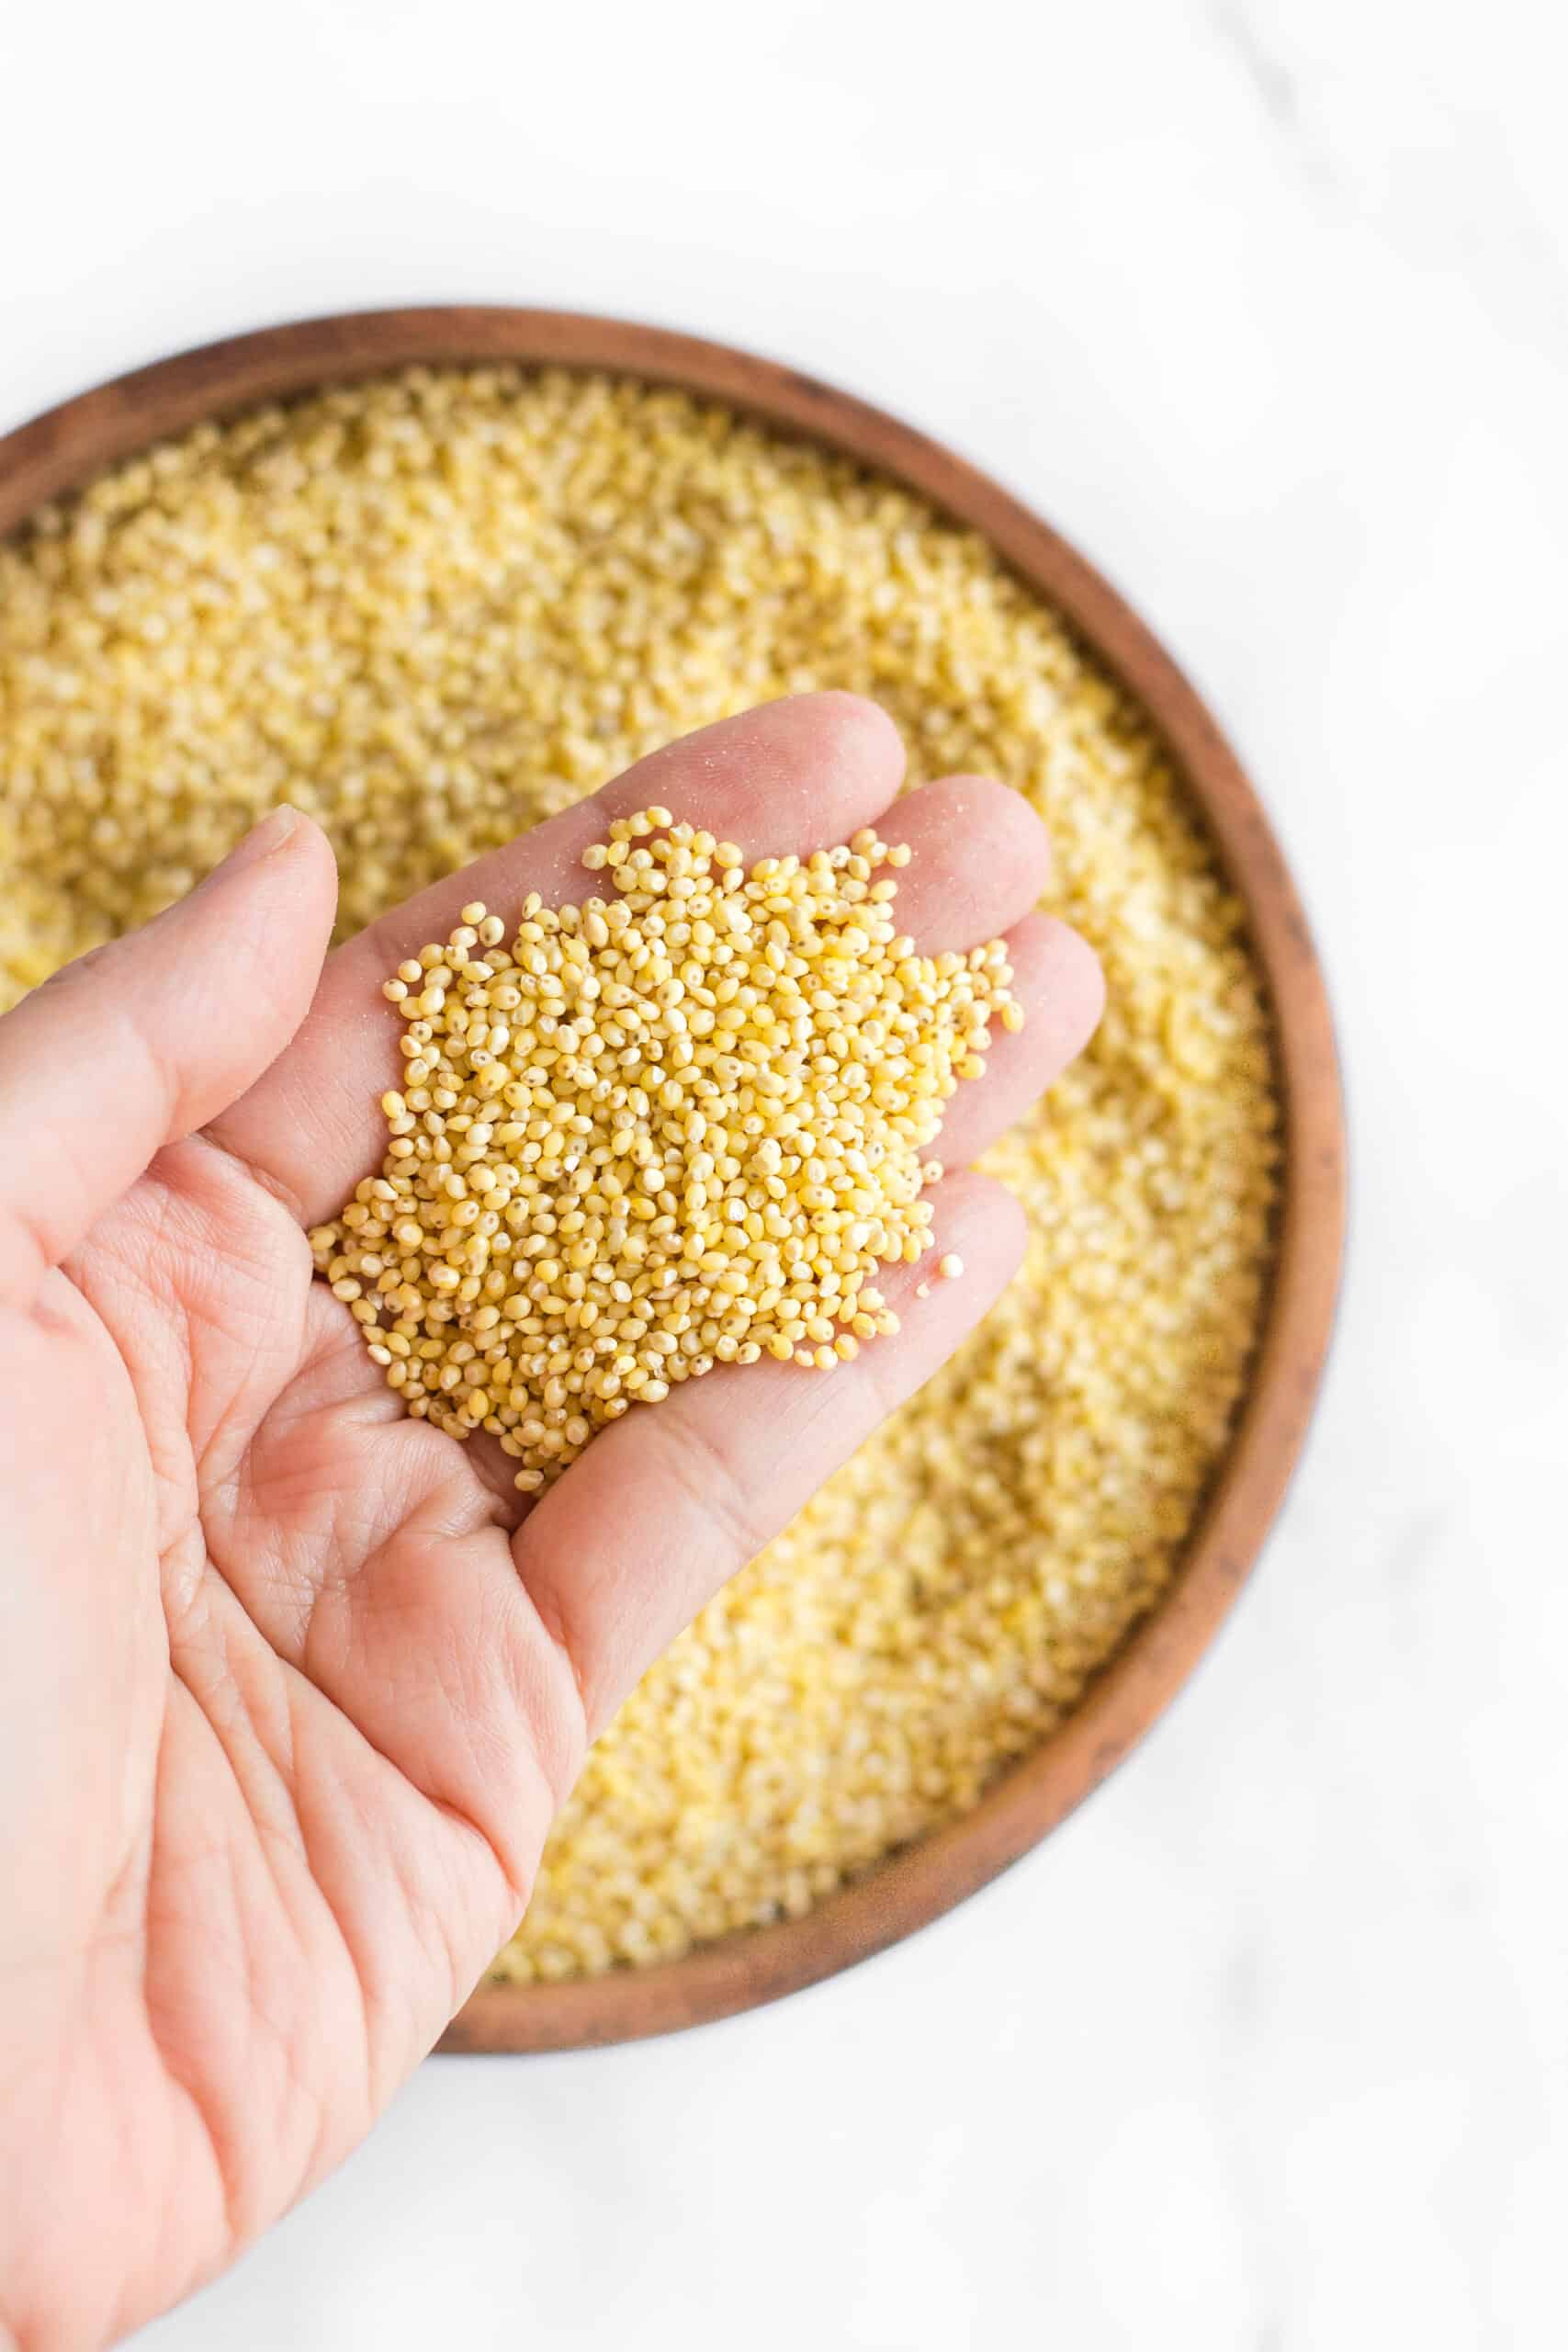 Holding up millet seeds from a wooden bowl.